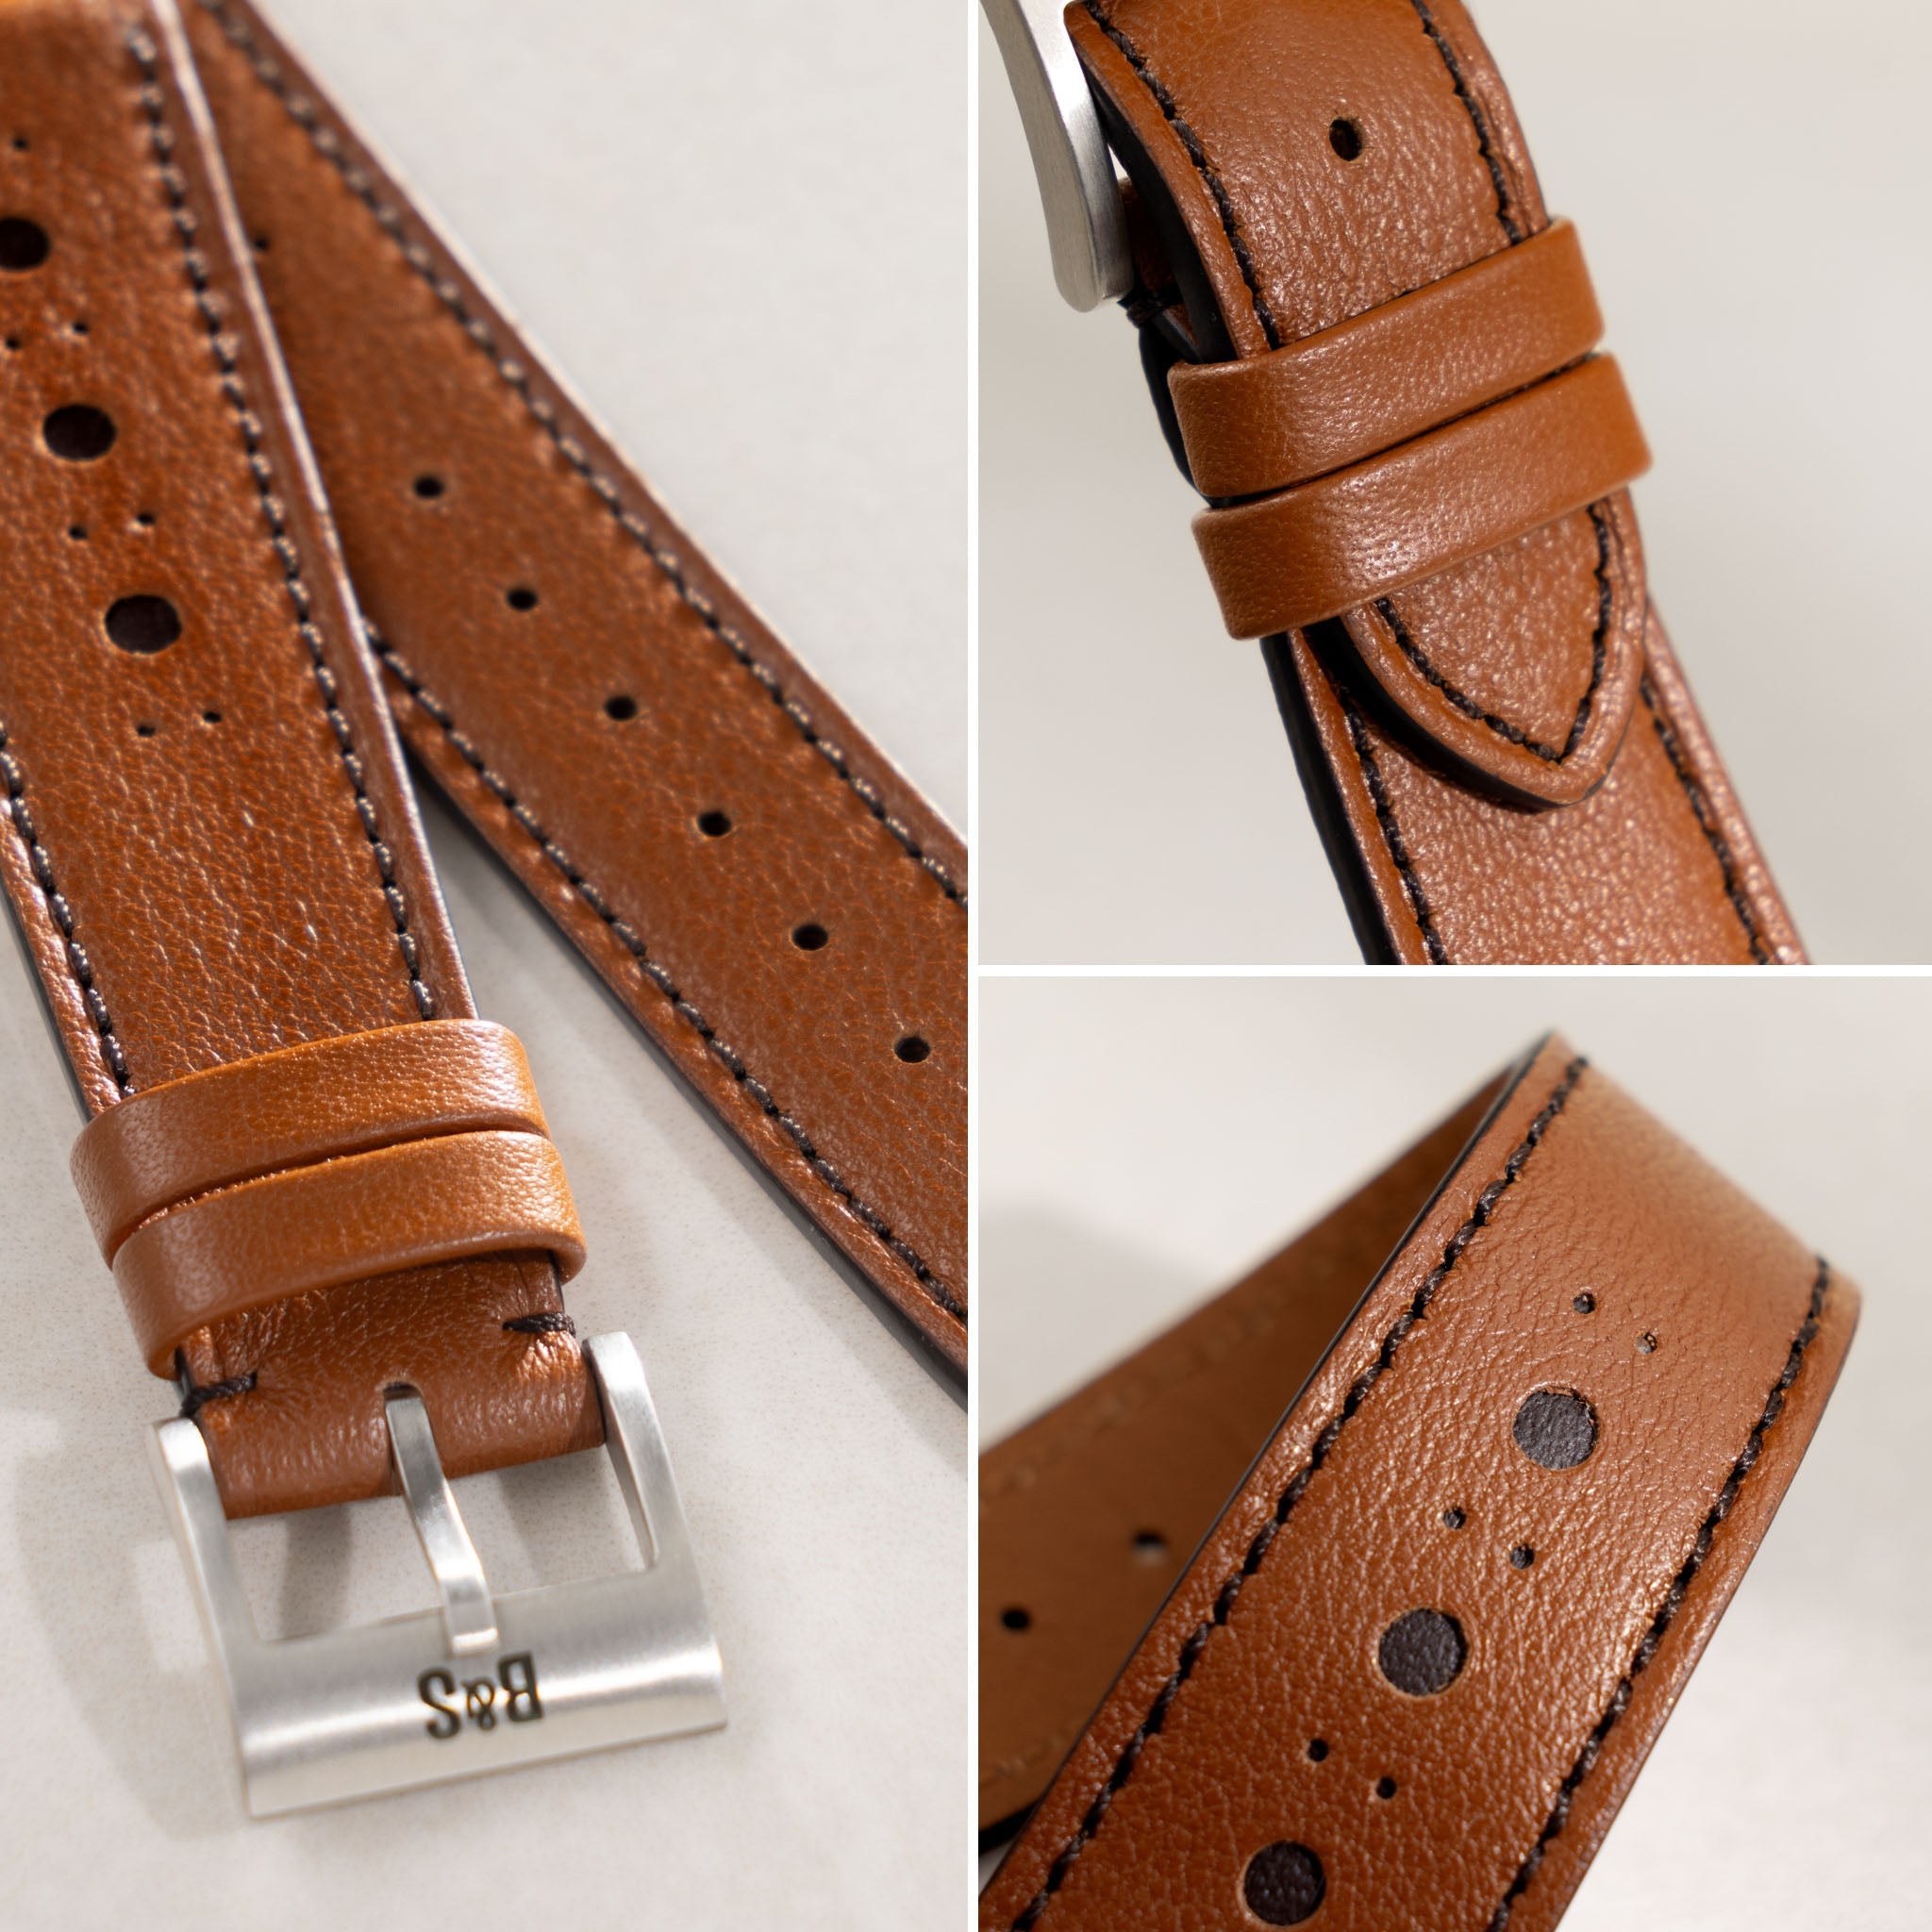 The Night Out Brown Brogue Leather Watch Strap – Jubilee Edition